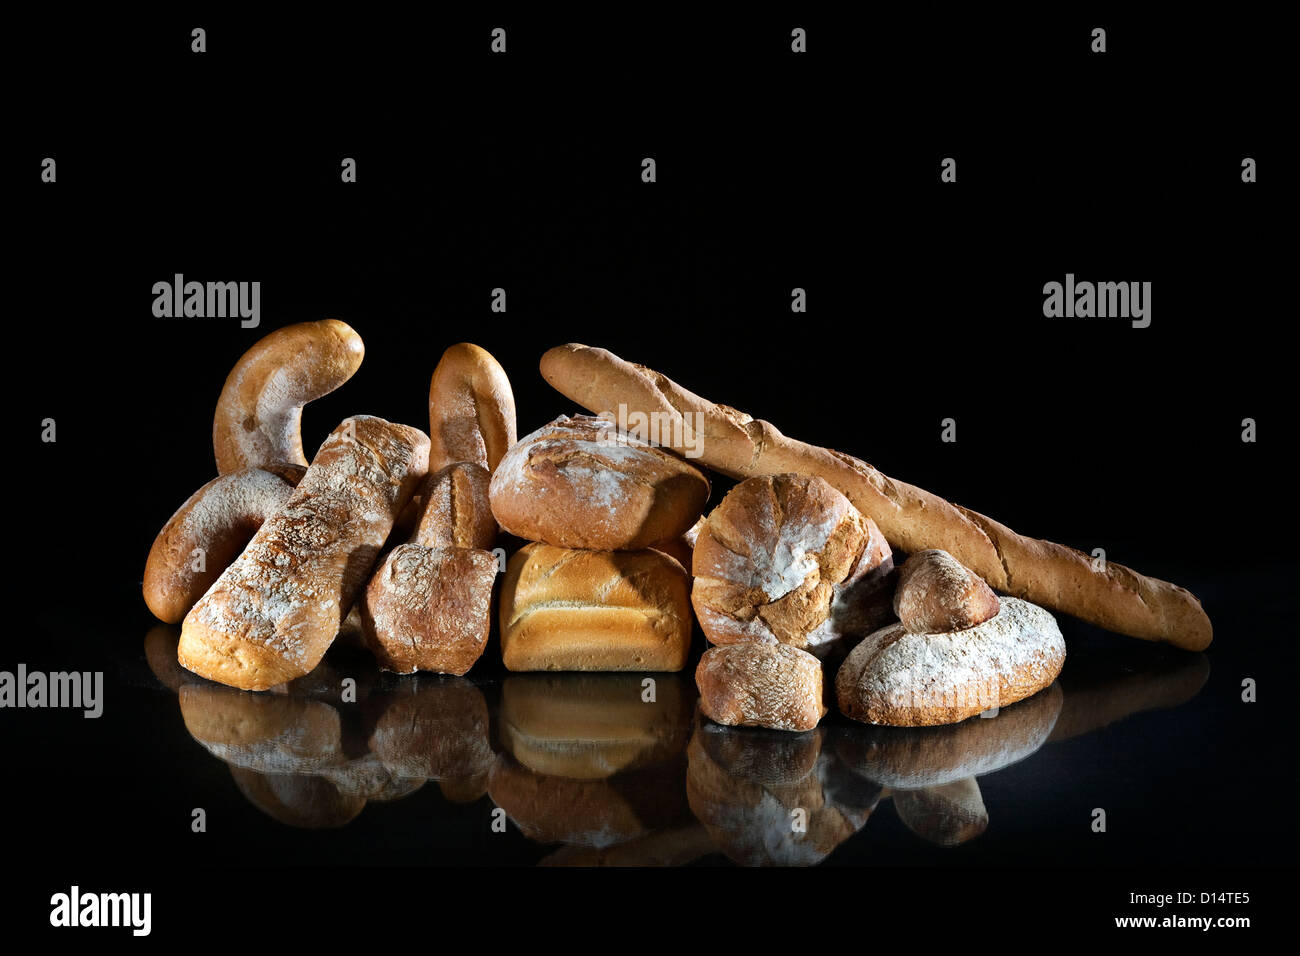 Assortment of French baguettes, different breads and loaves of bread on black background Stock Photo